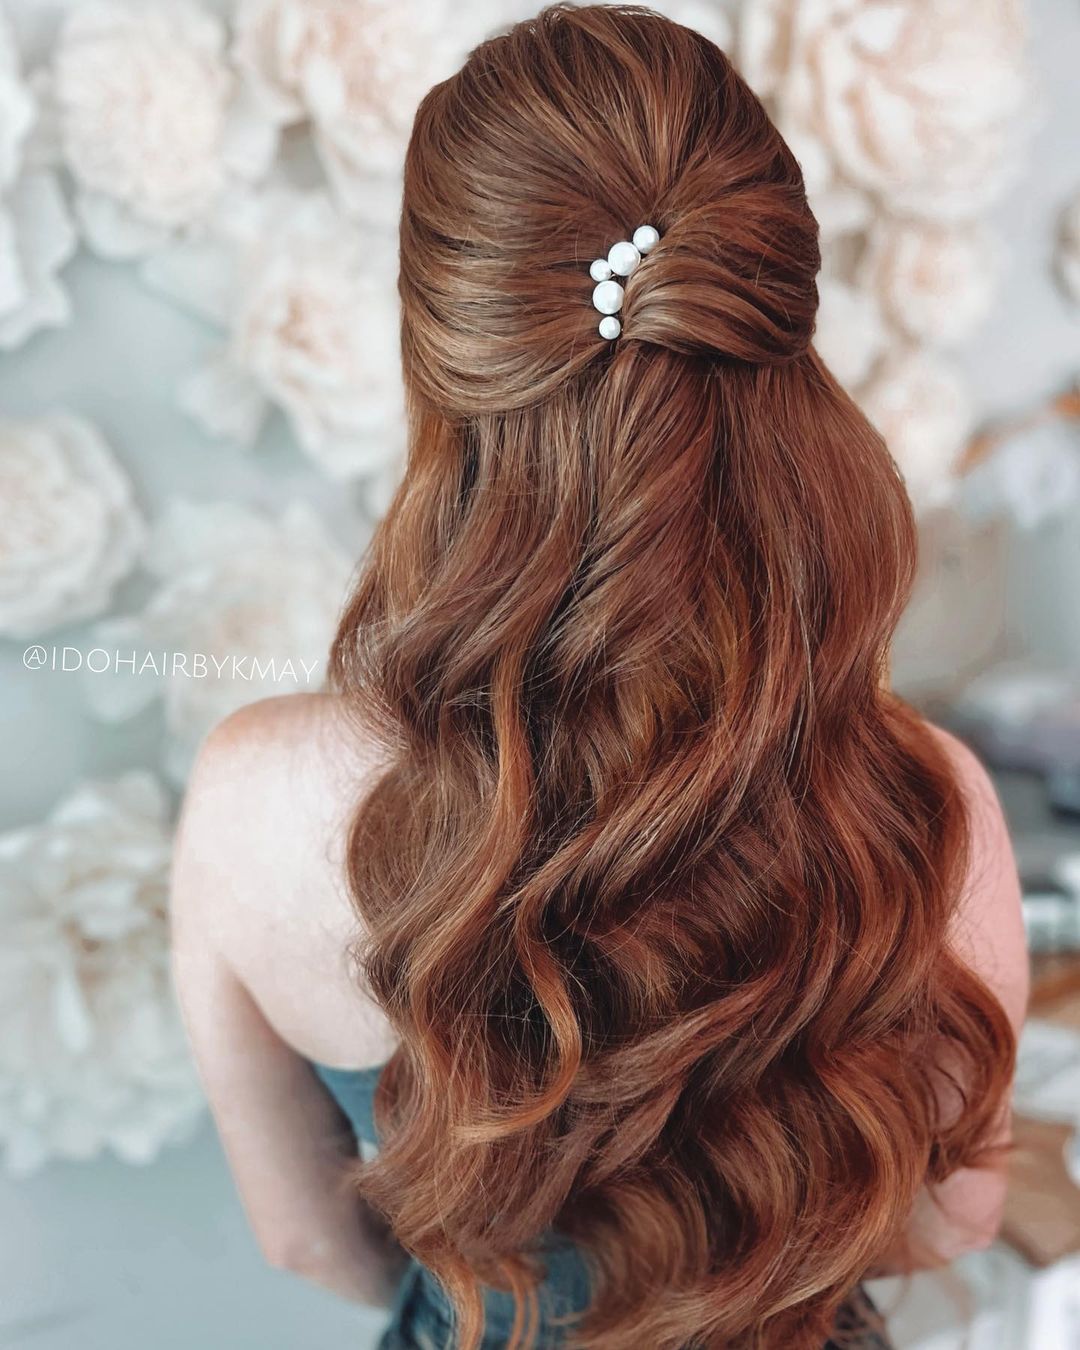 Ariel hairstyles by idohairbykmay